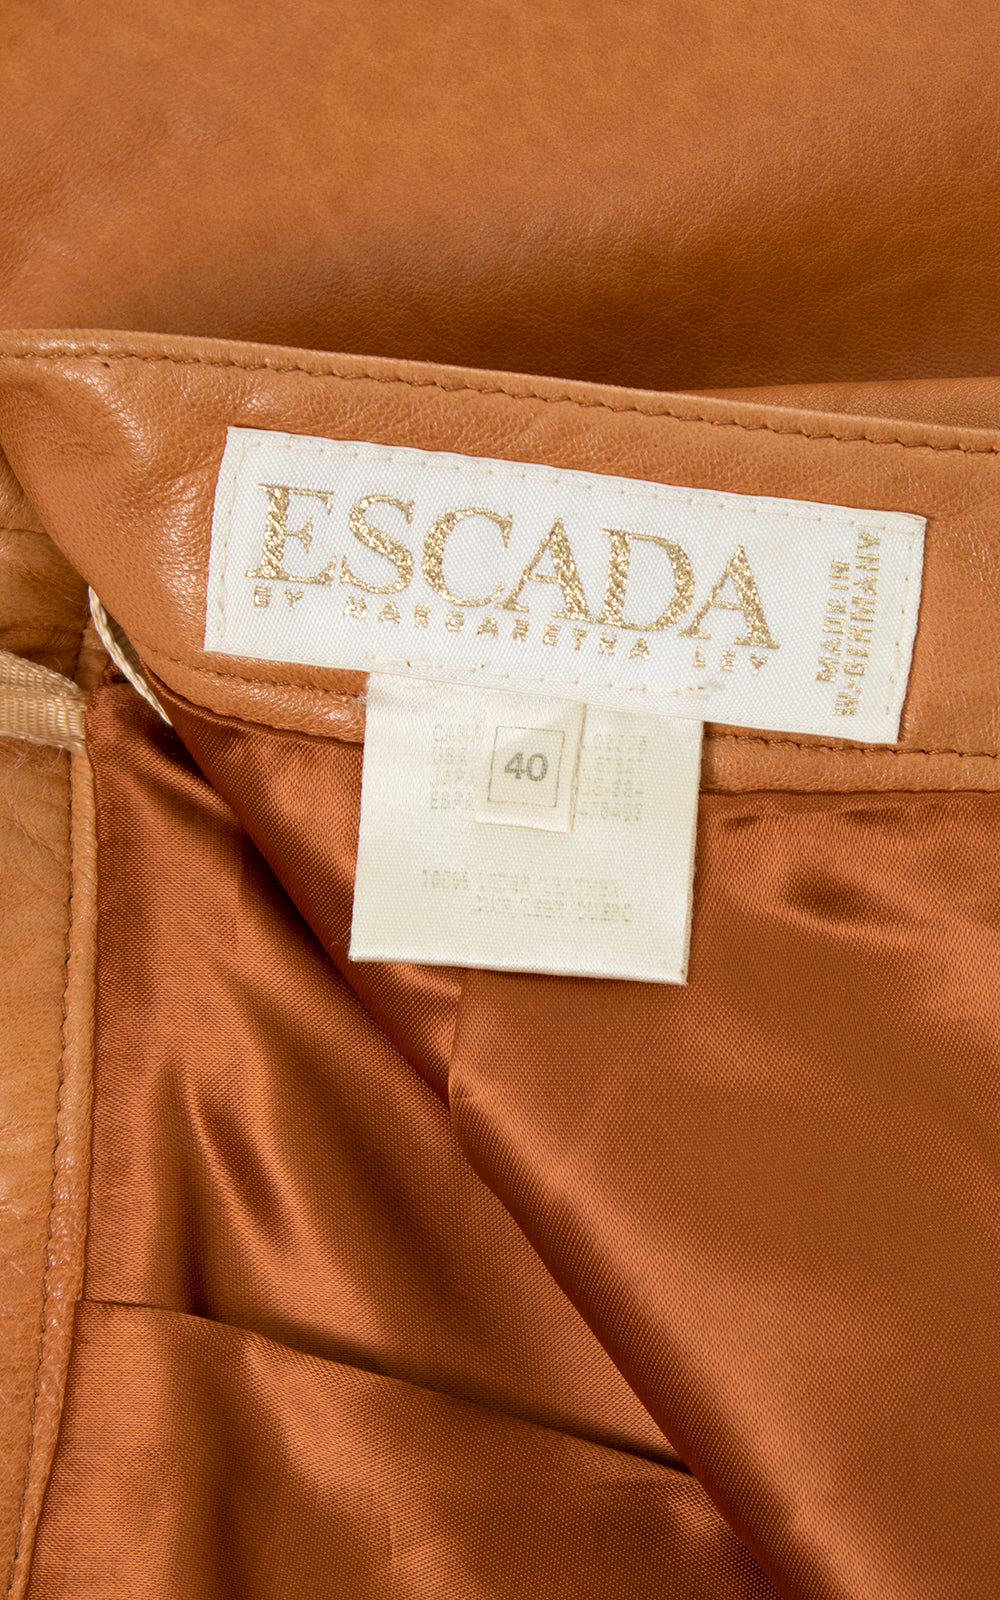 Vintage 1980s ESCADA Buttery Brown Leather Pencil Skirt with Pocket by Birthday Life Vintage